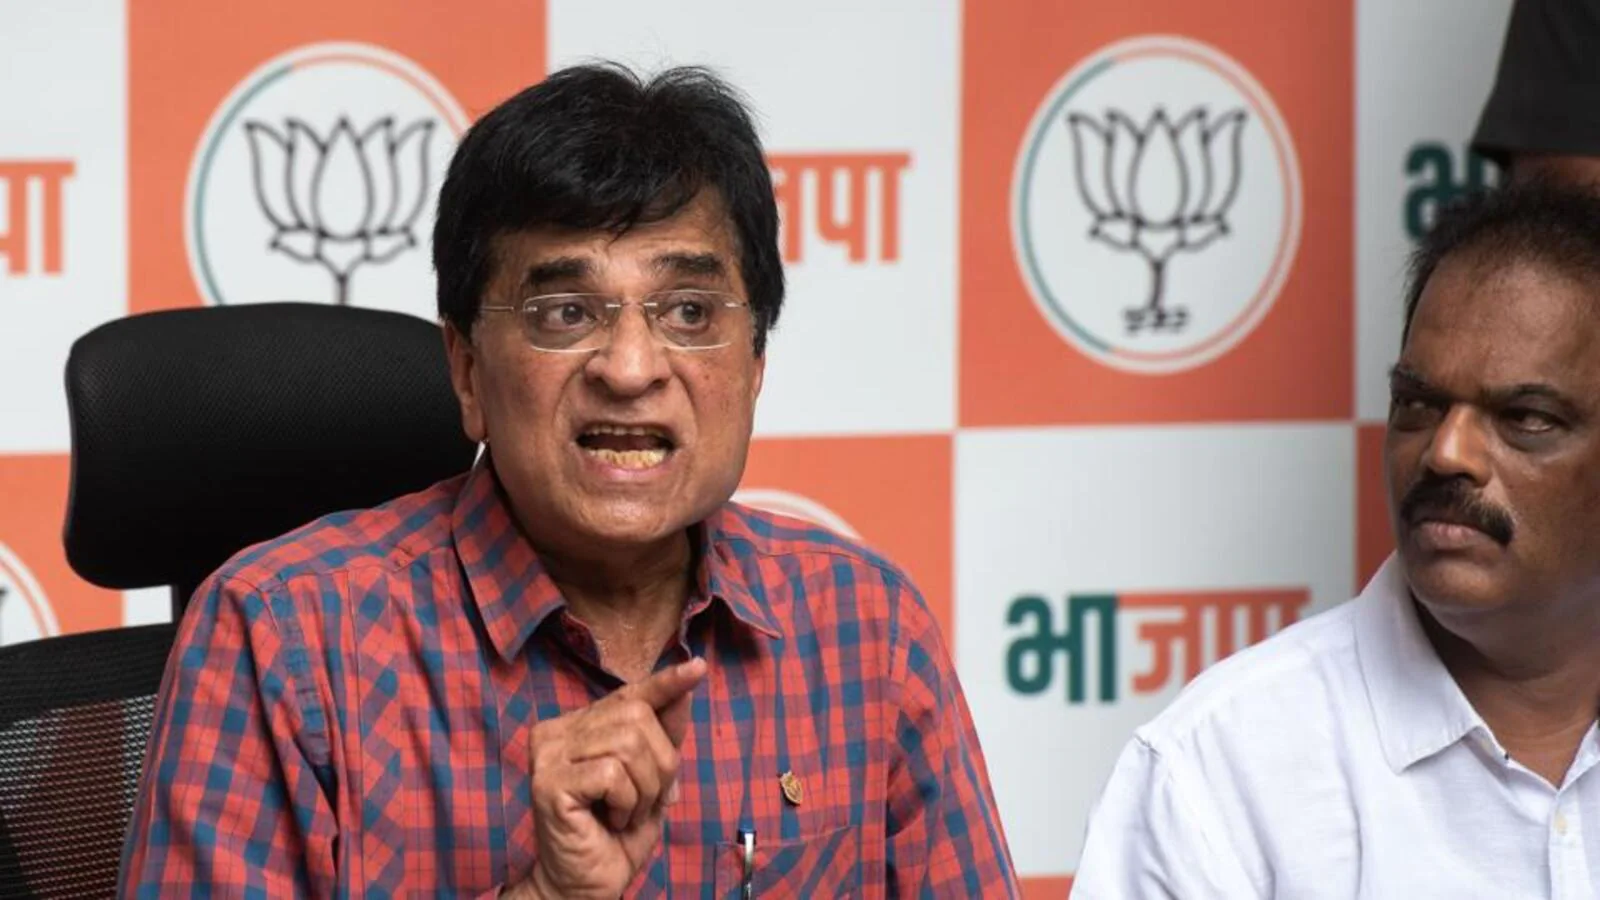 Somaiya seeks probe into ‘illegal and fake’ FIR registered by Khar police